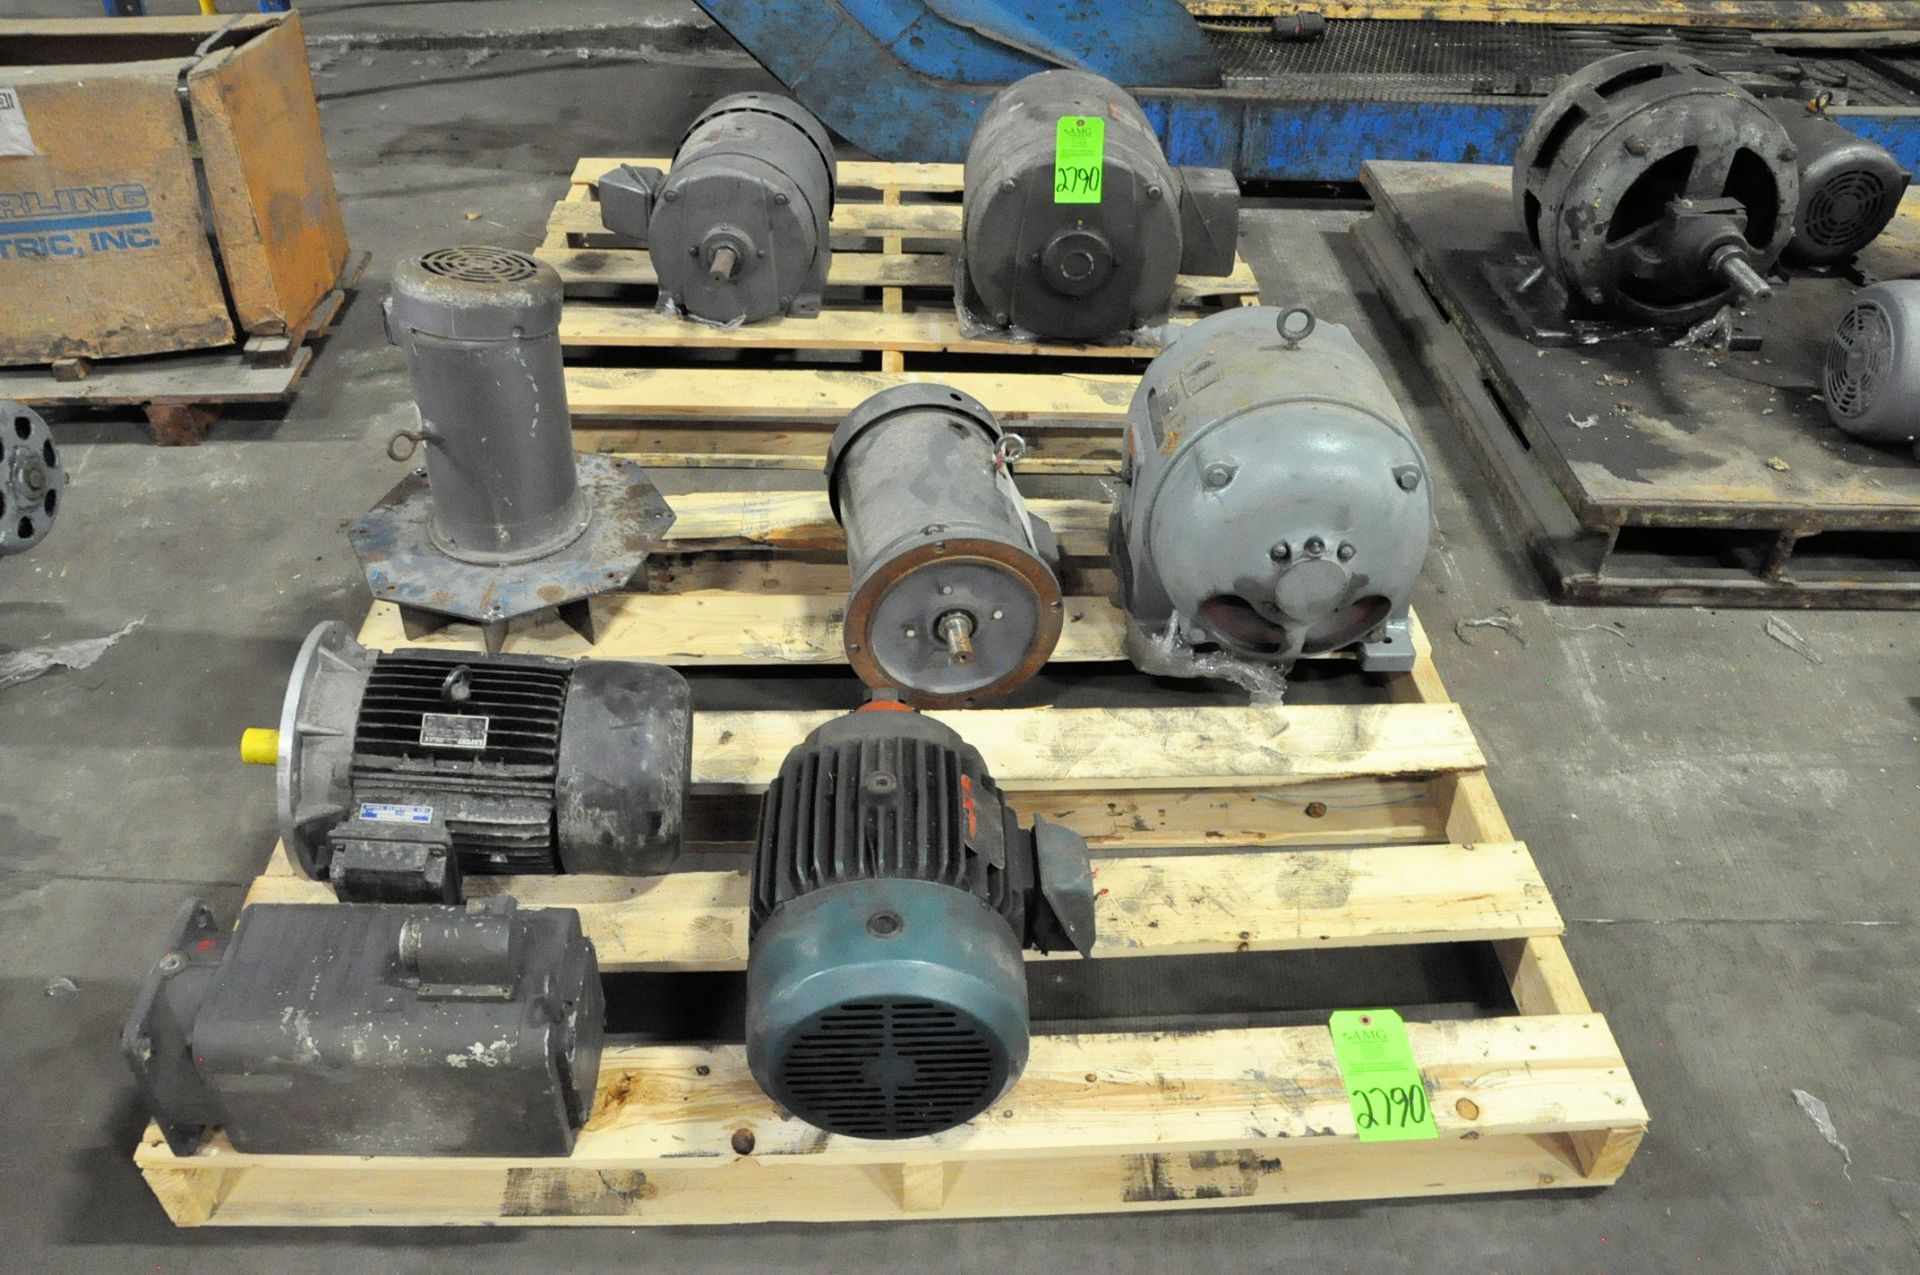 Lot-(8) Various Motors on (2) Pallets in (1) Row, (Warehouse Room), (Green Tag)